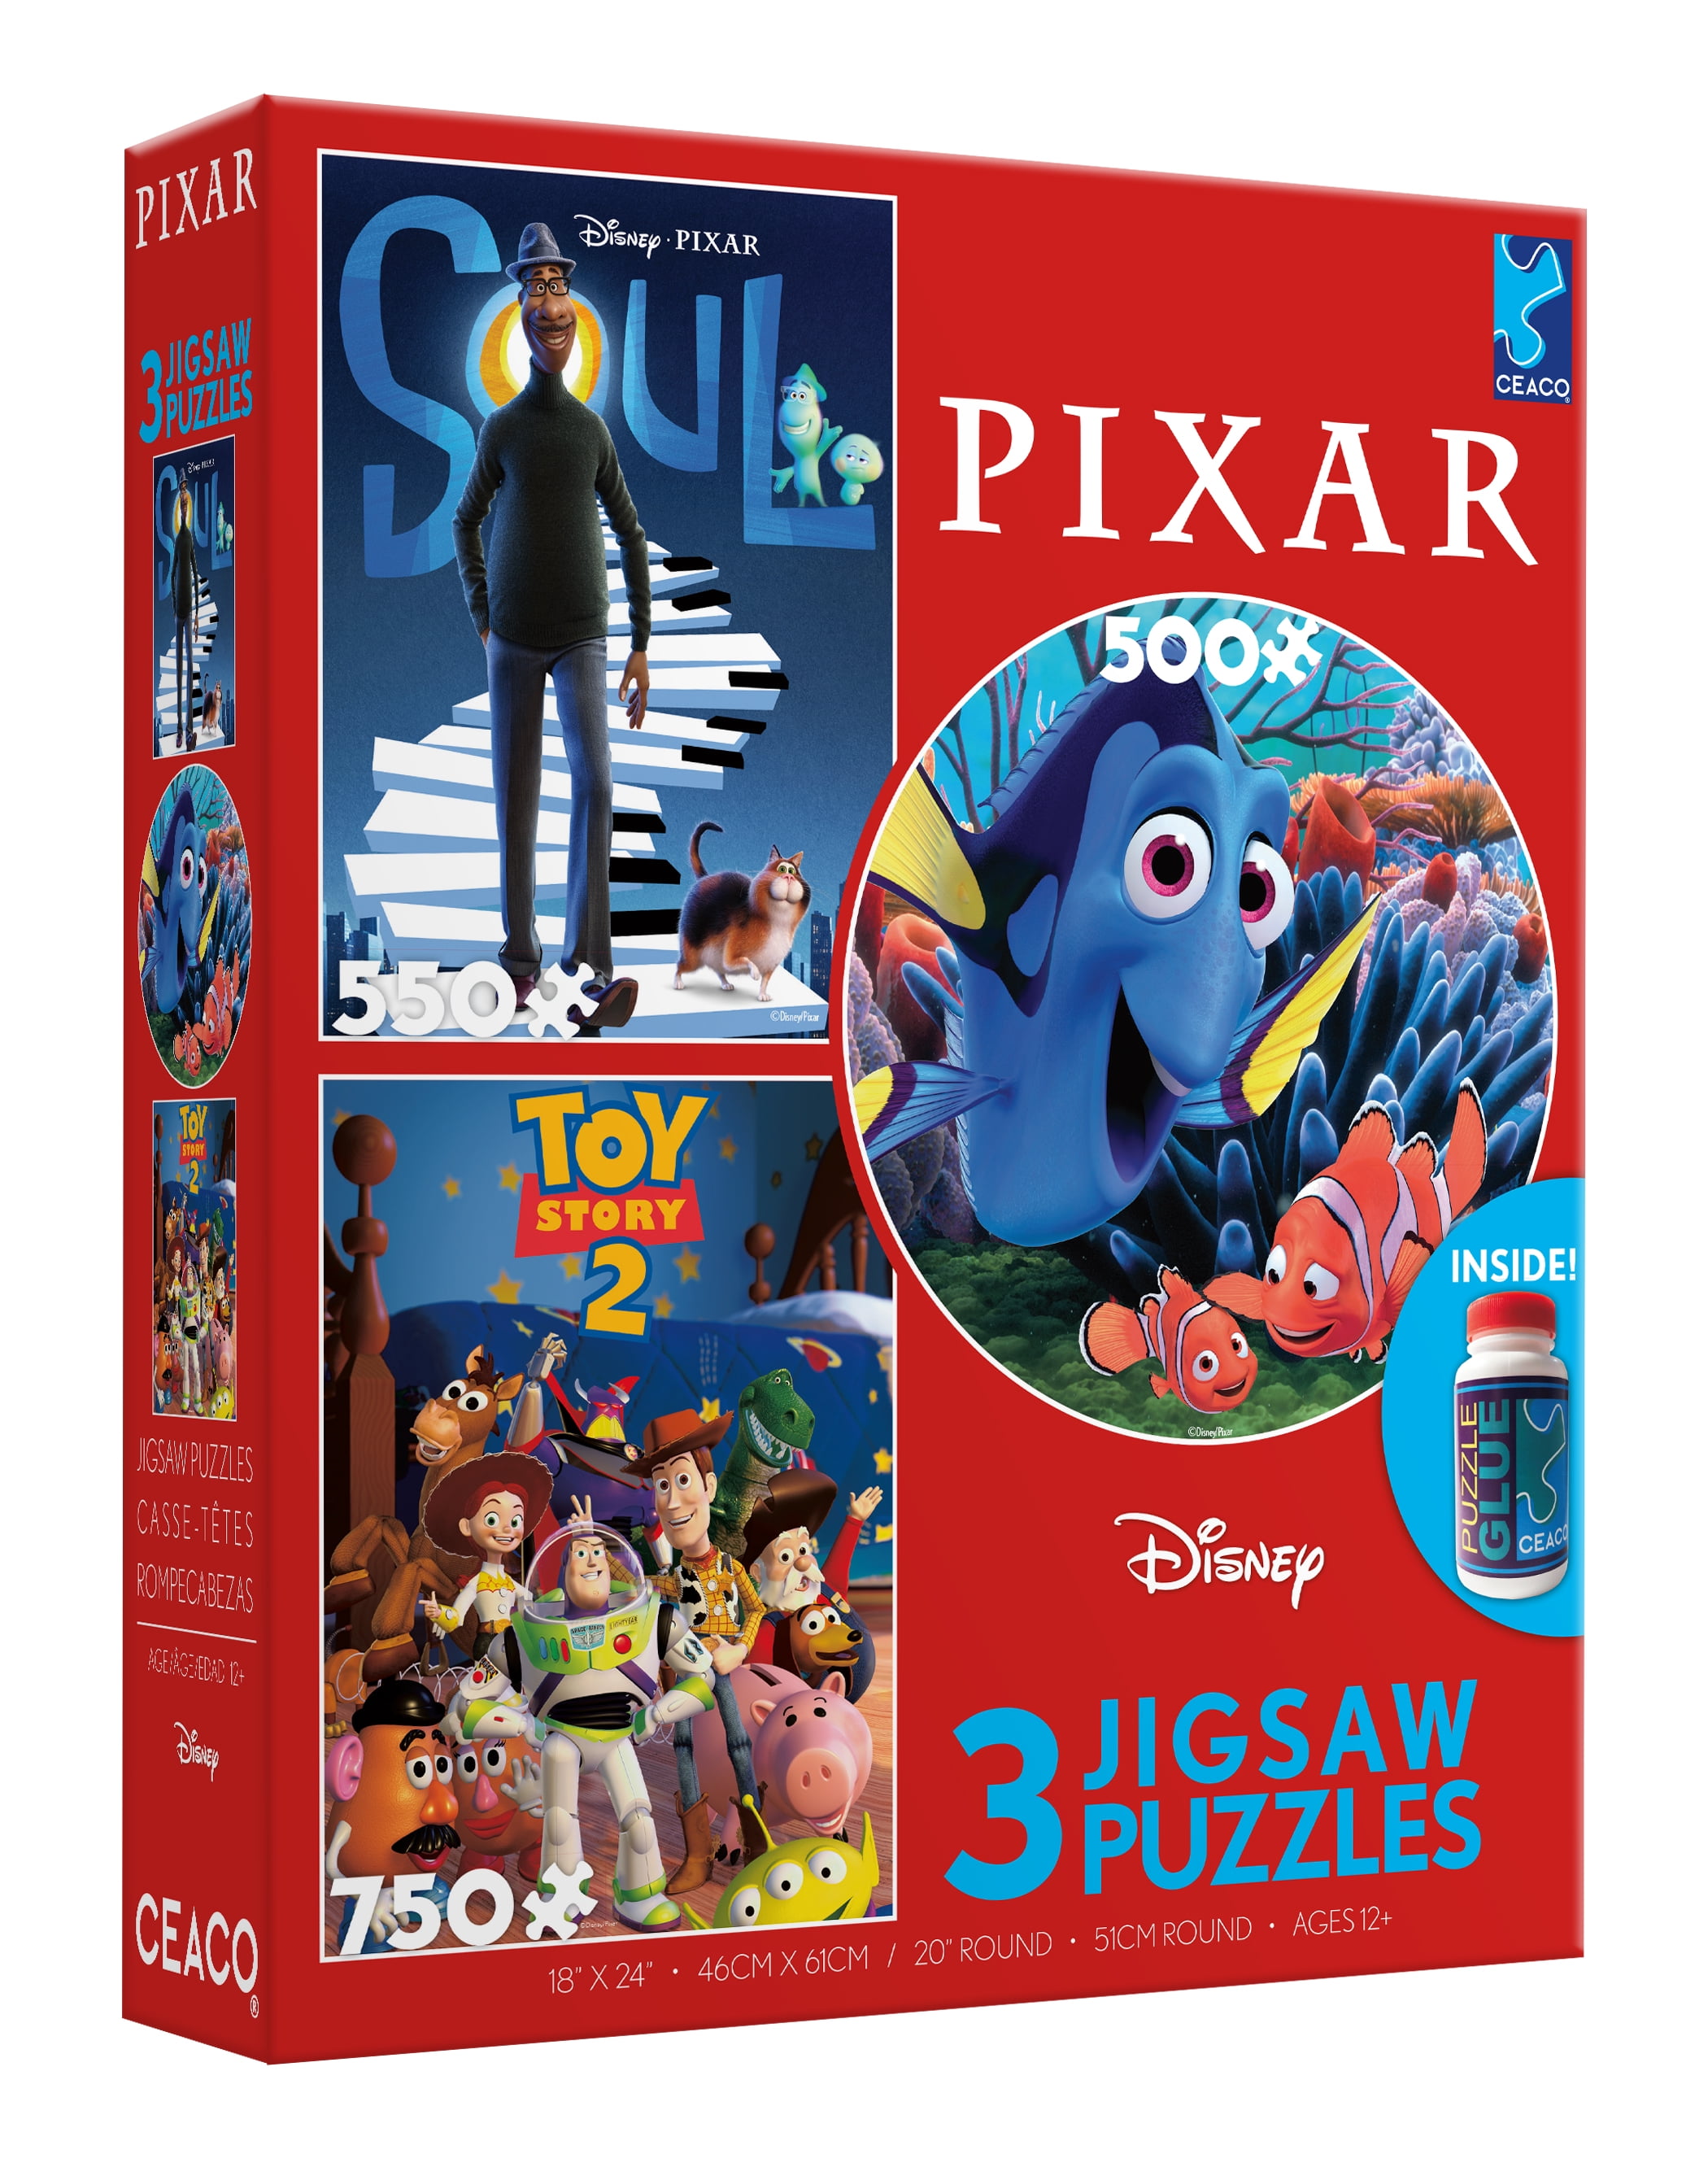 Disney Pixar Movie Clips Poster Puzzle 300 Piece by Ceaco 24 X 18 Inches for sale online 